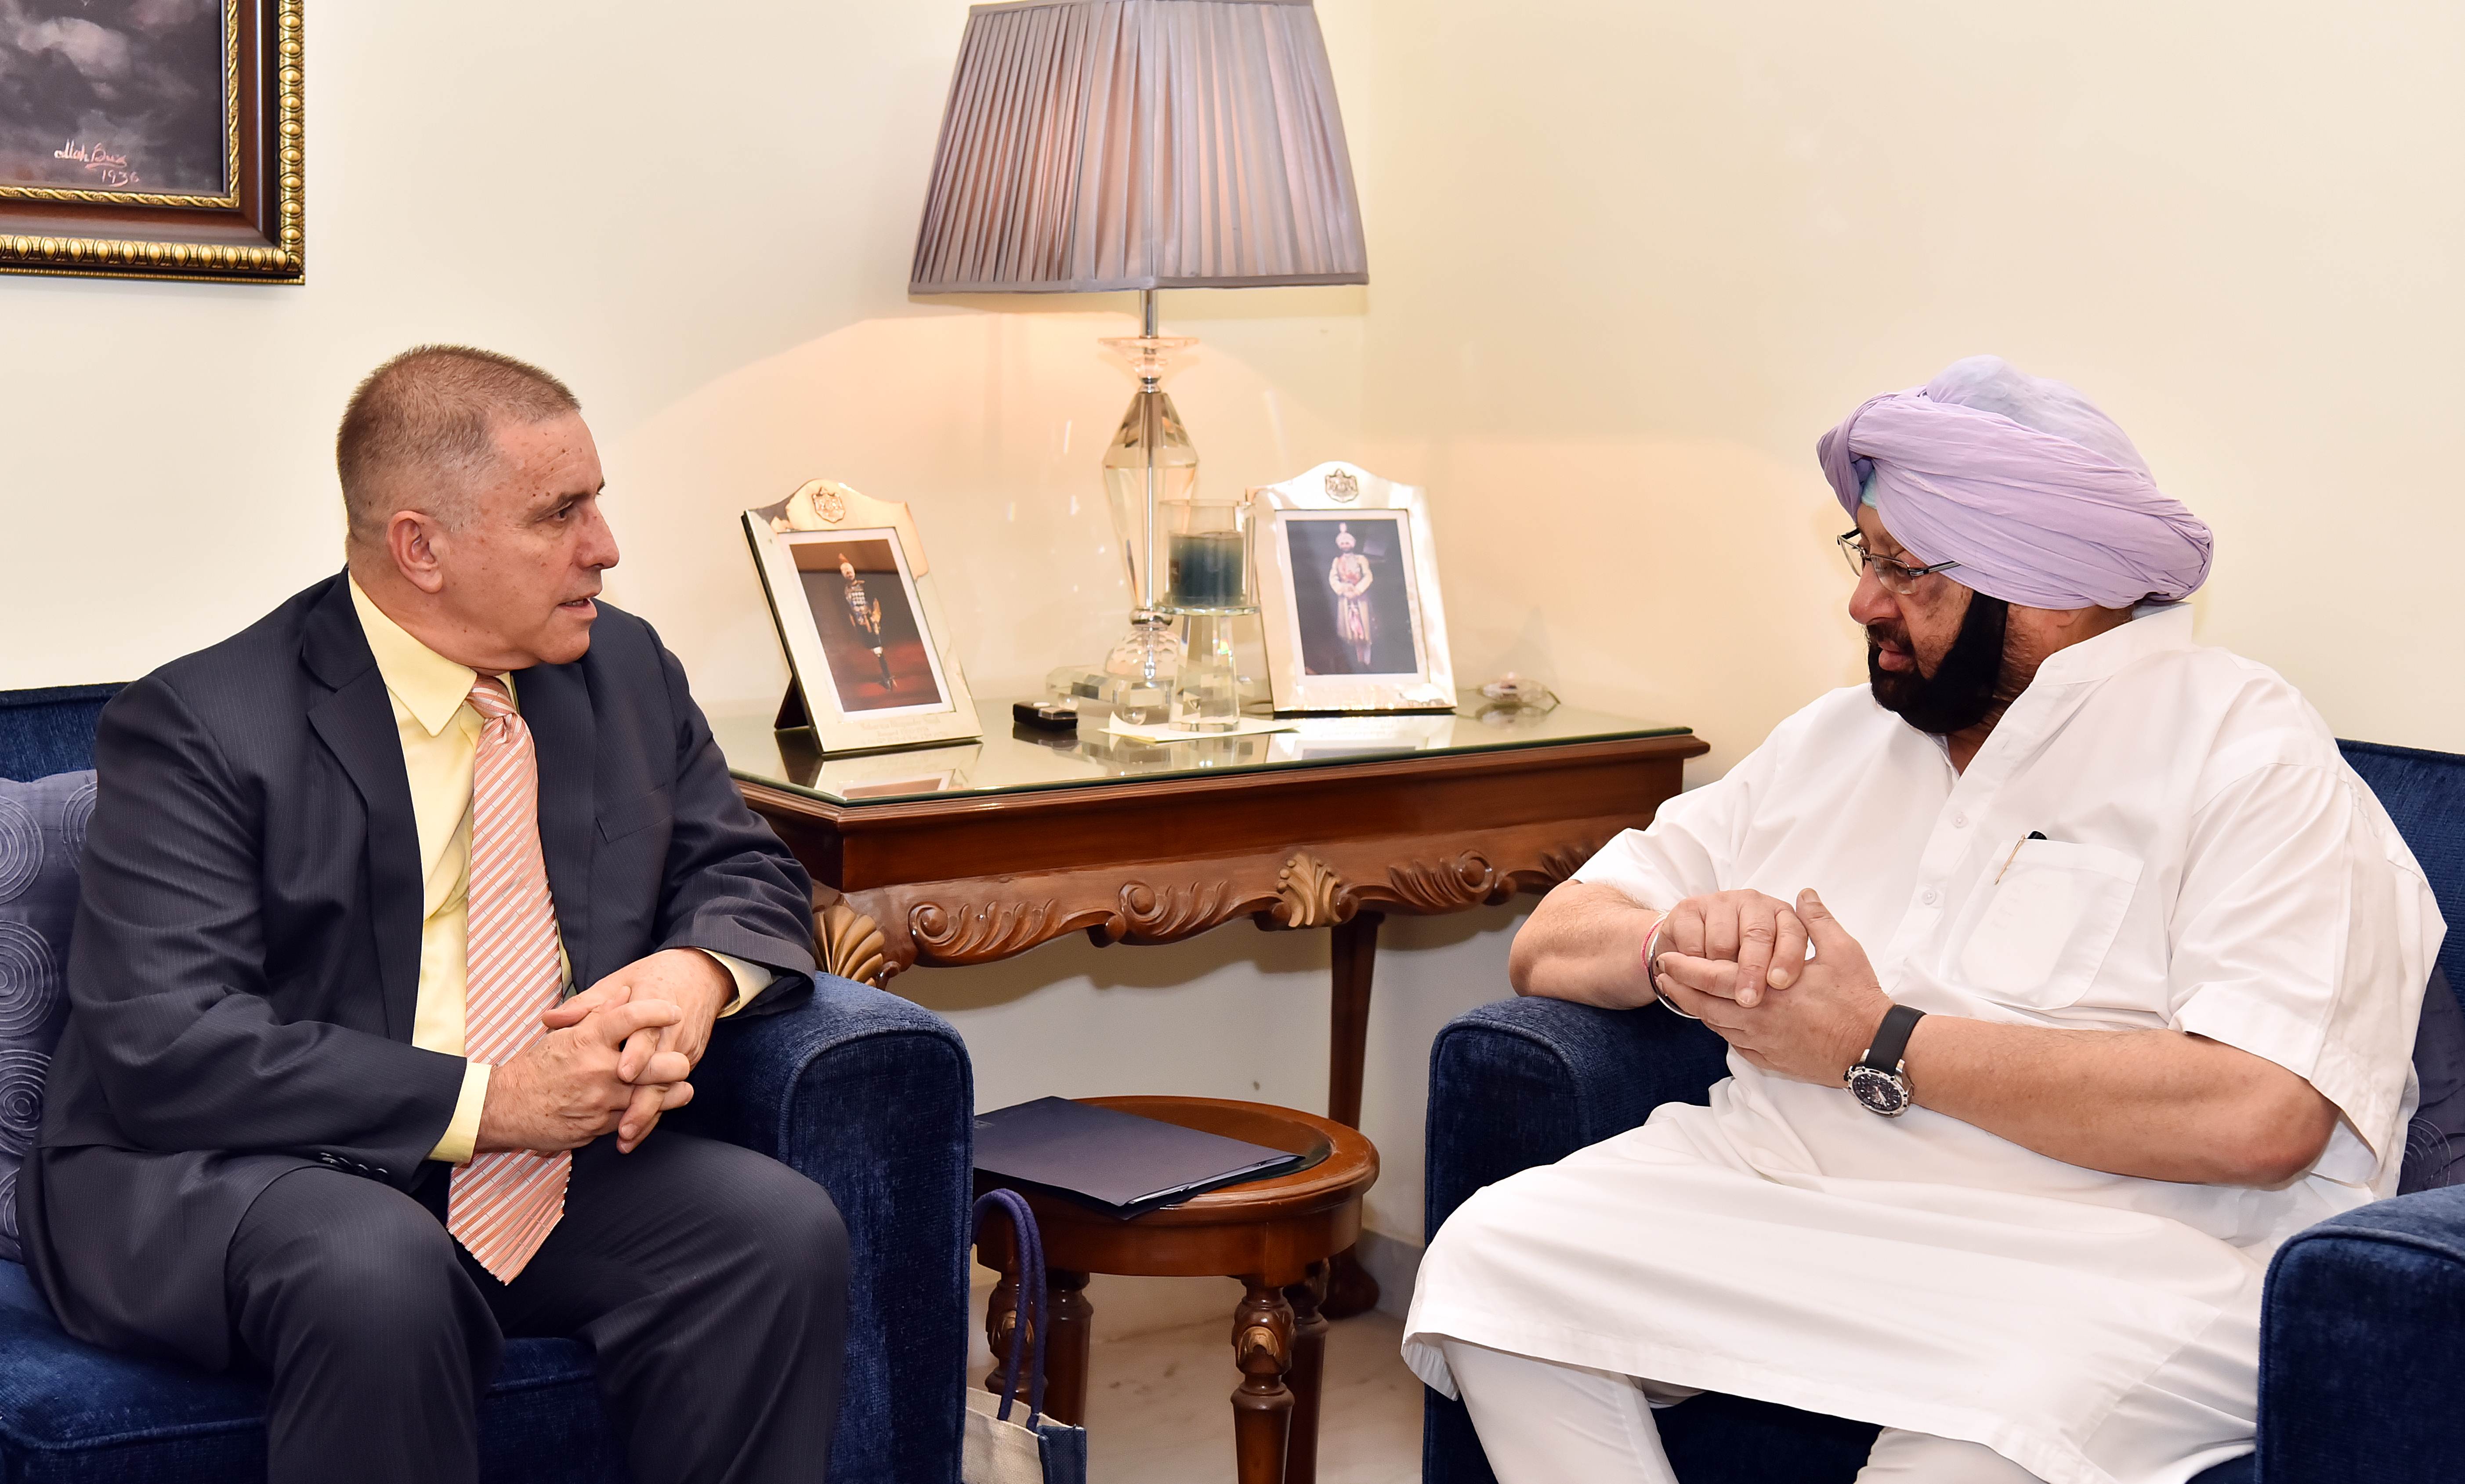 Israel seeks govt, pvt sector cooperation with Punjab in agriculture, dairy farming, police training, technology exchange